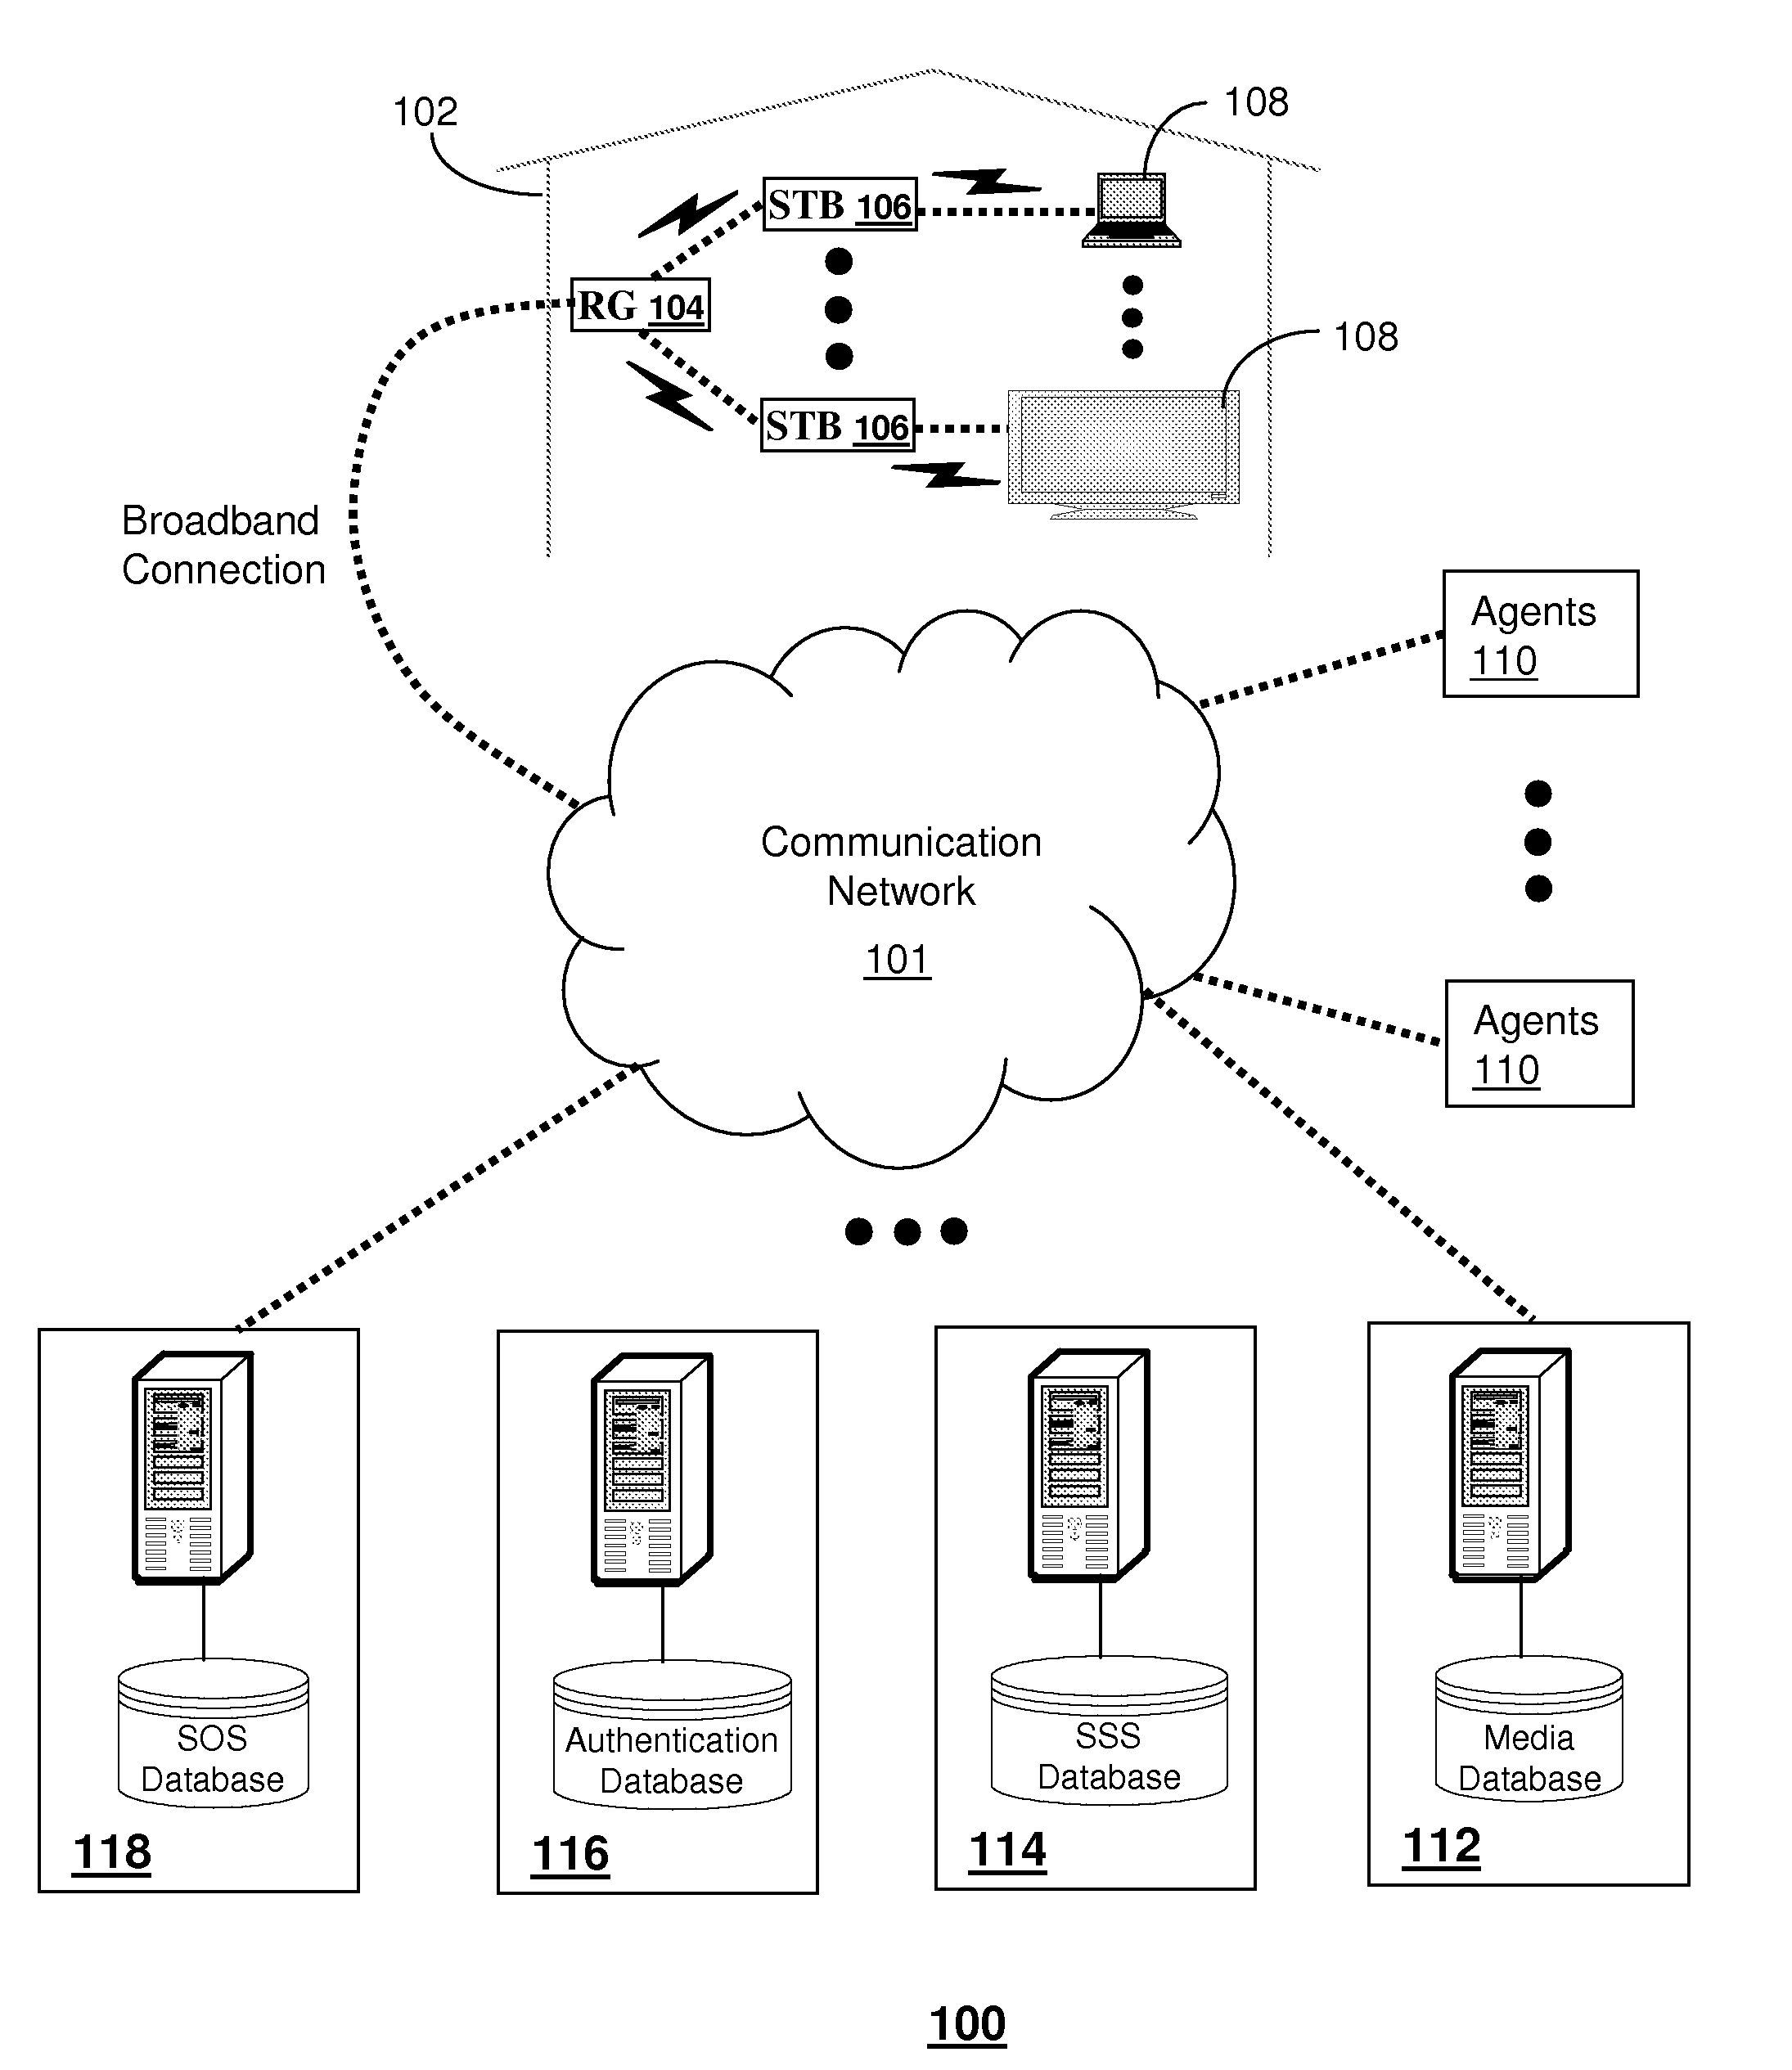 System for provisioning media services